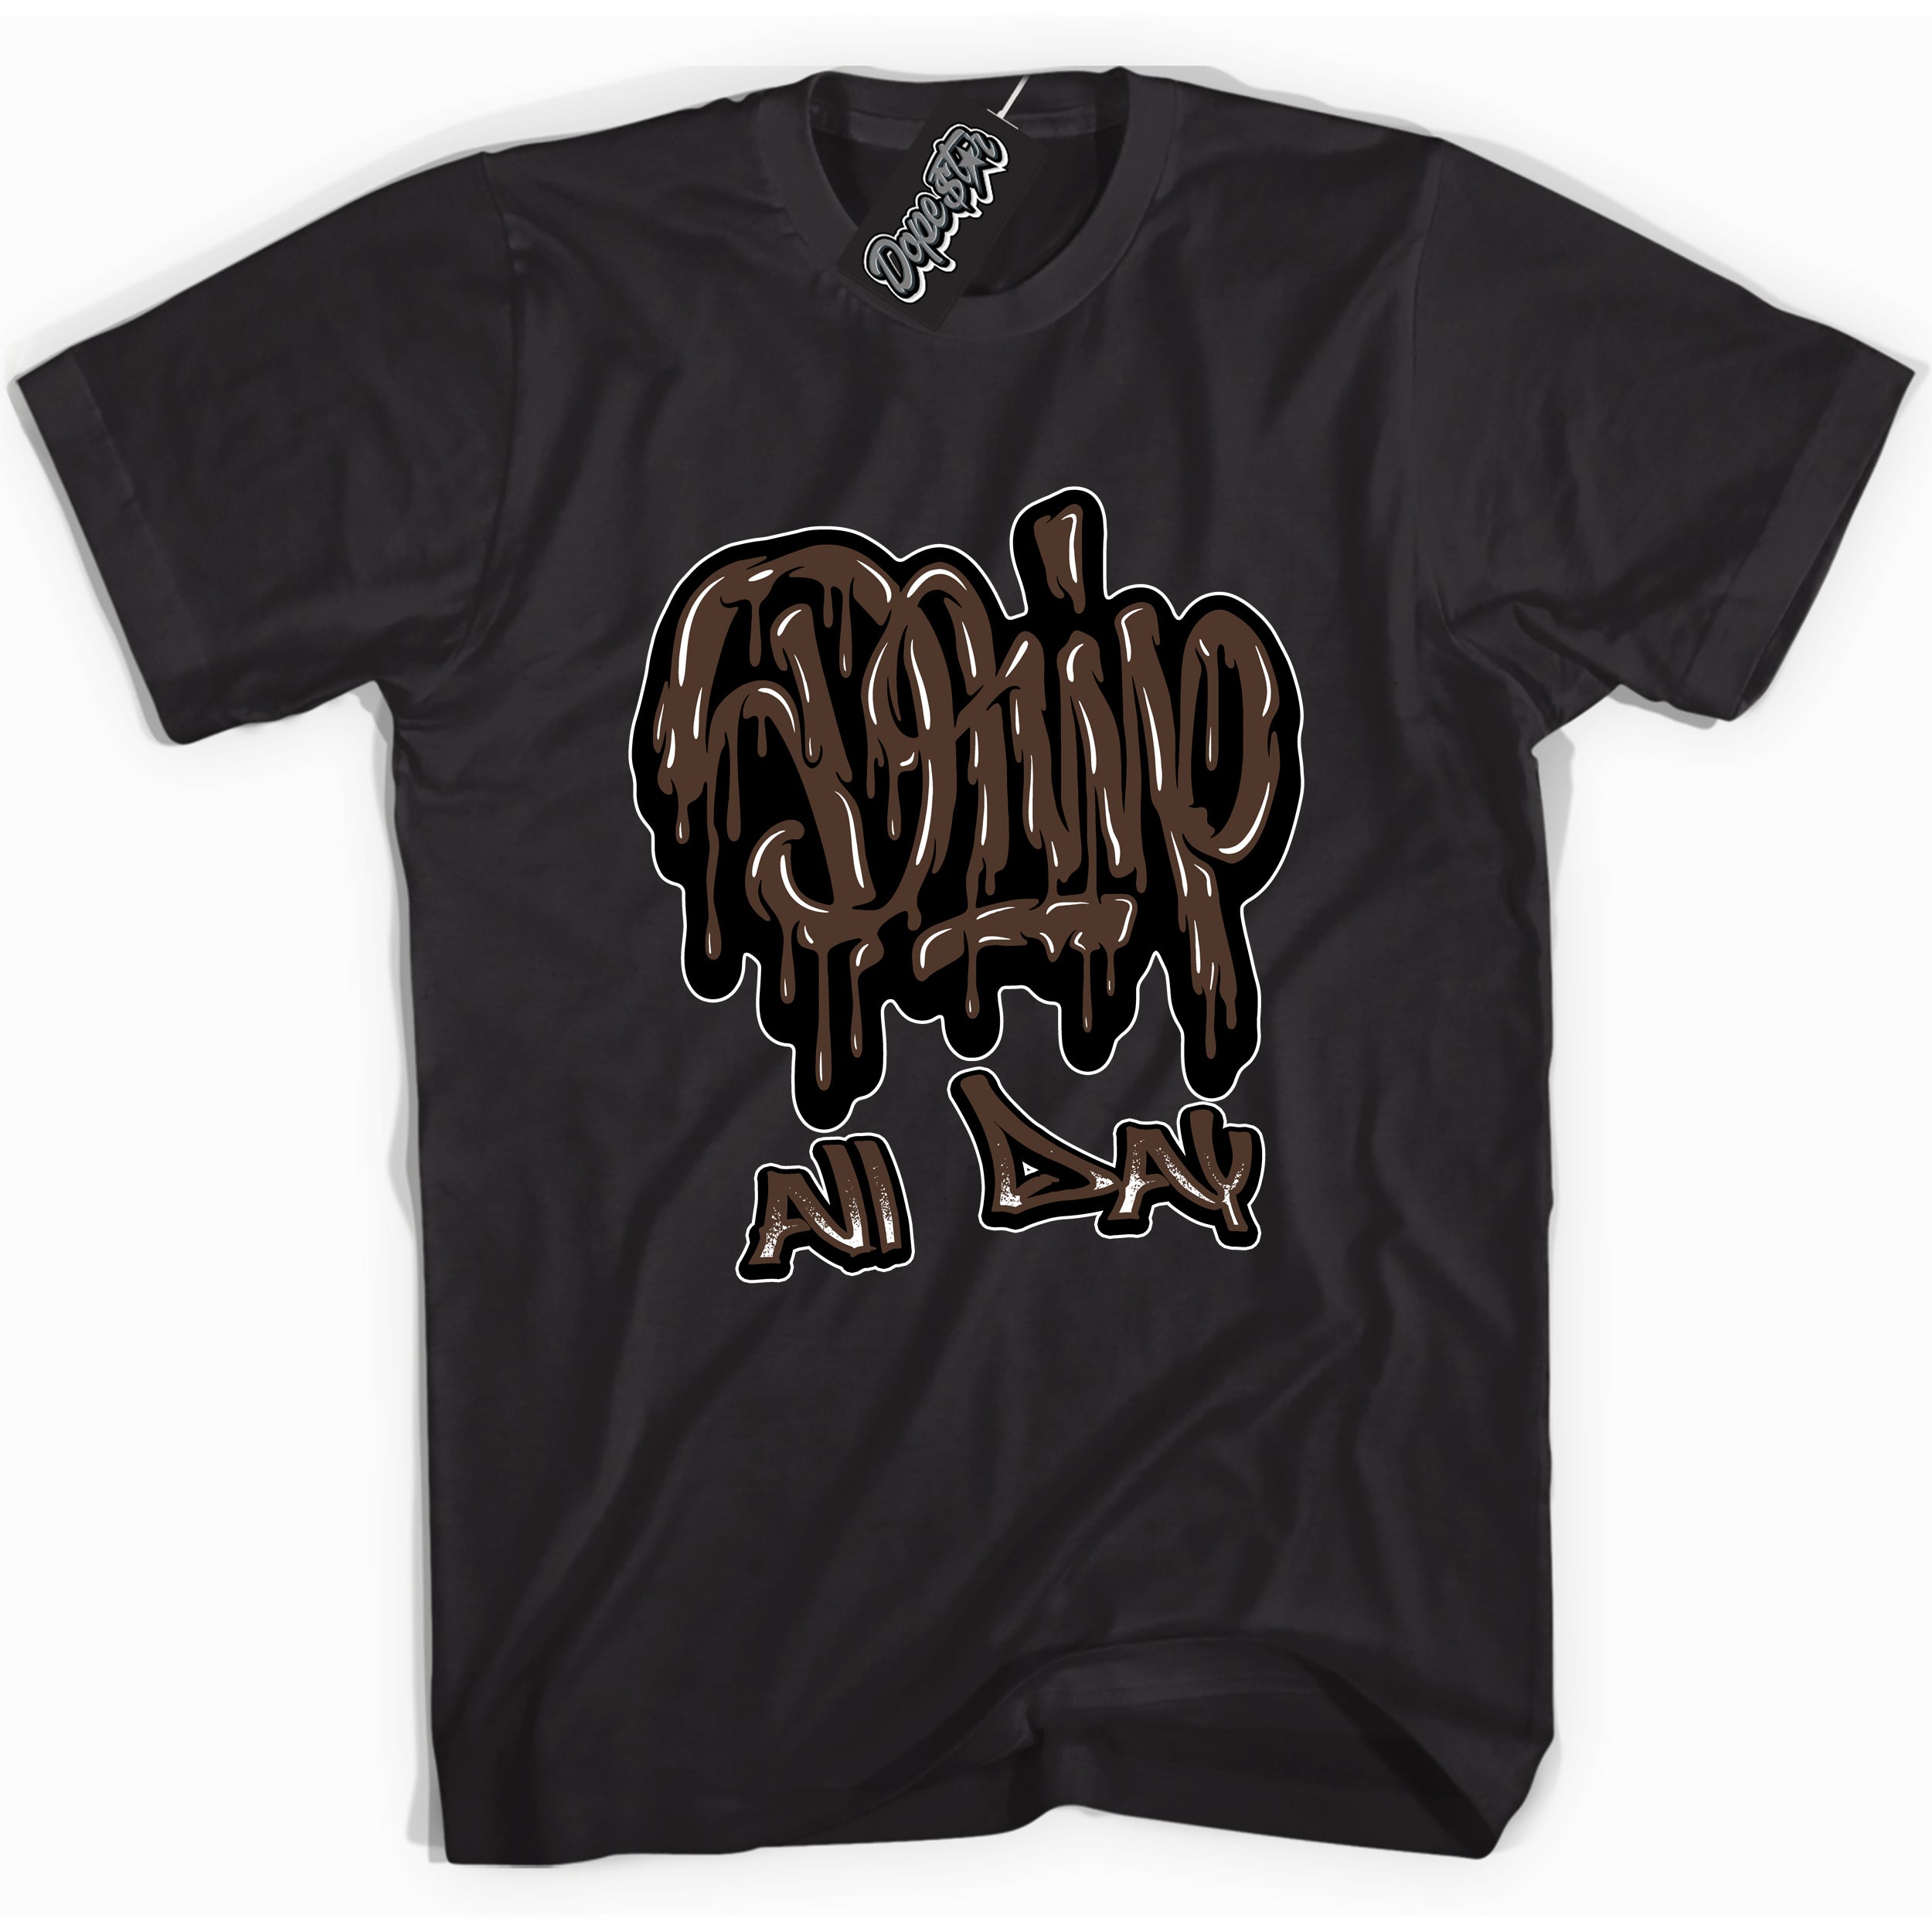 Cool Black graphic tee with “ Drip All Day ” design, that perfectly matches Palomino 1s sneakers 